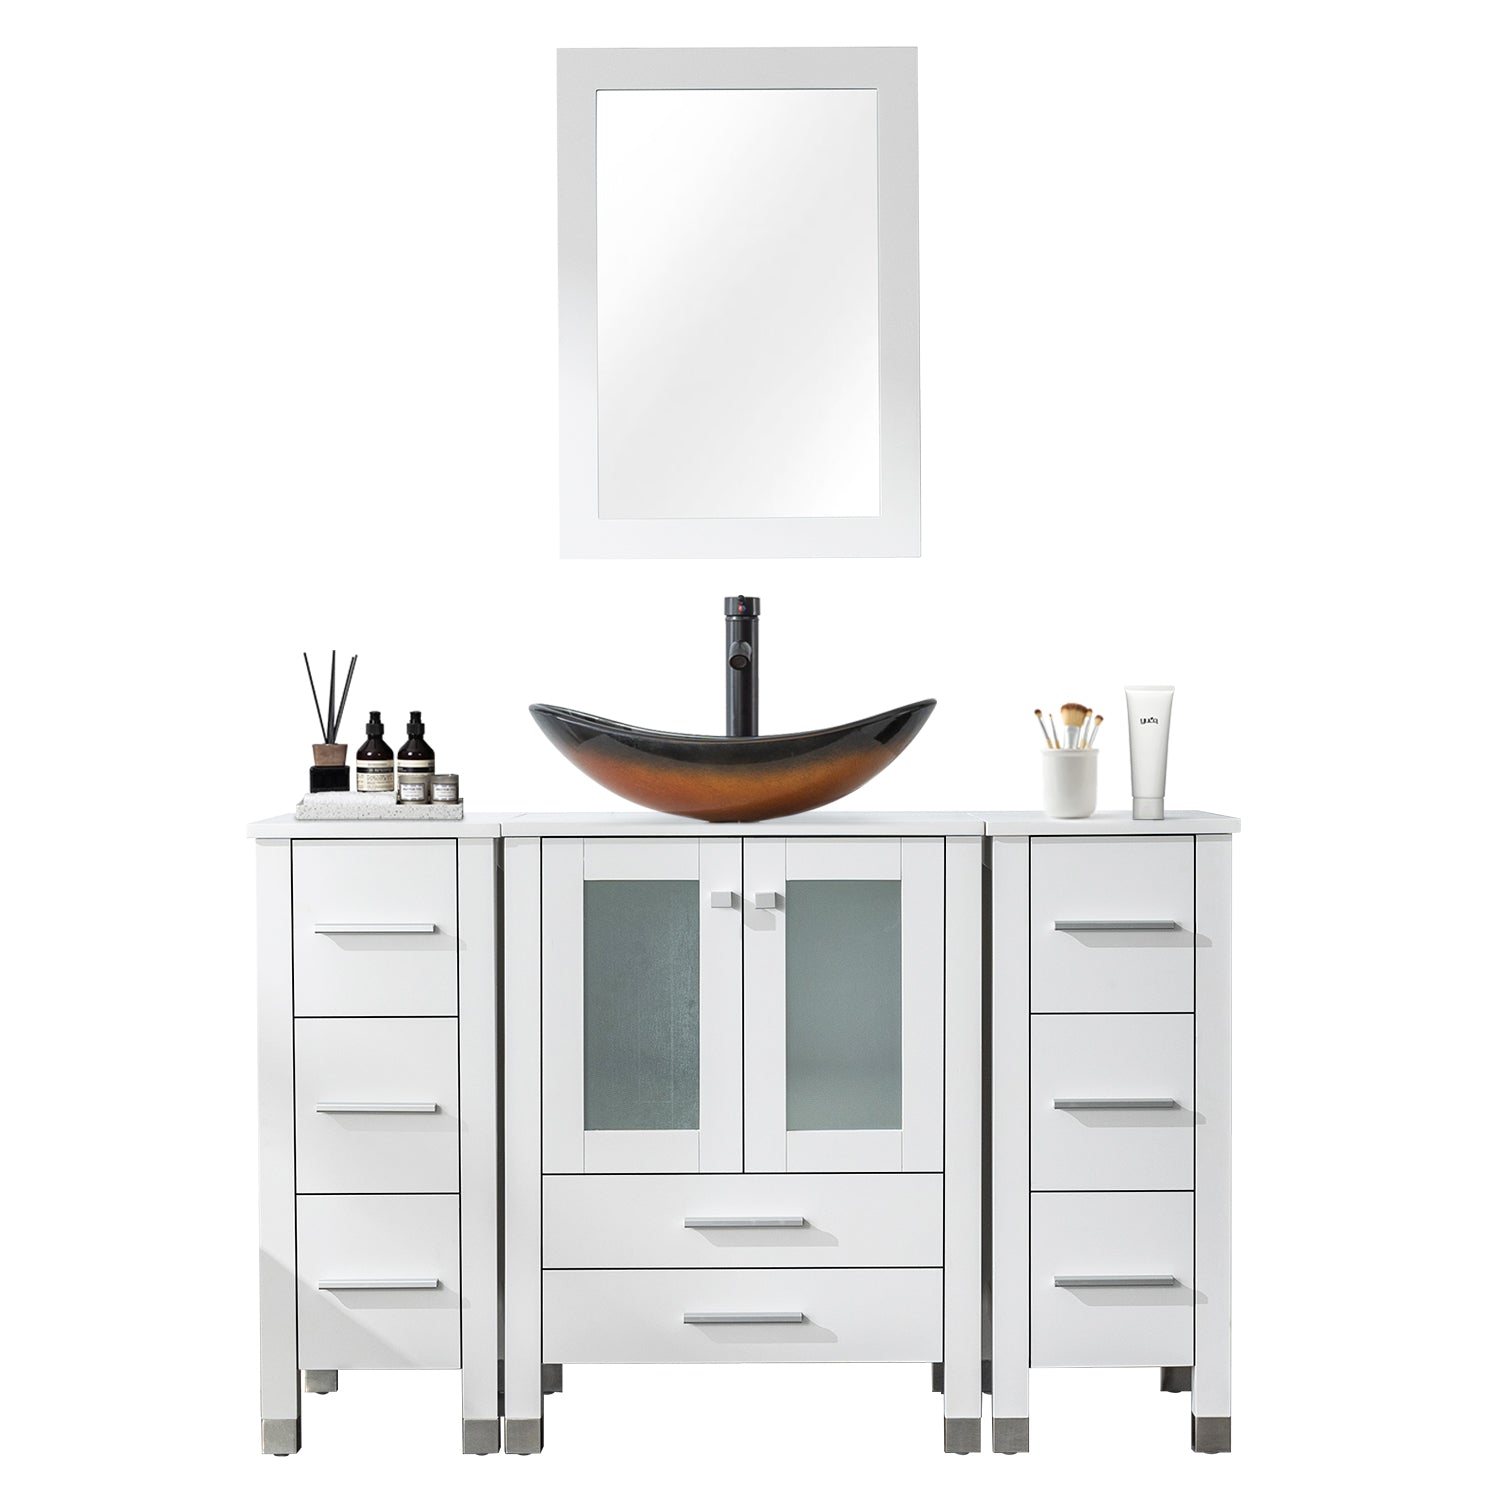 Eclife 48" Bathroom Vanity Sink Combo, Solid Wood Construction and Painted Frame - White